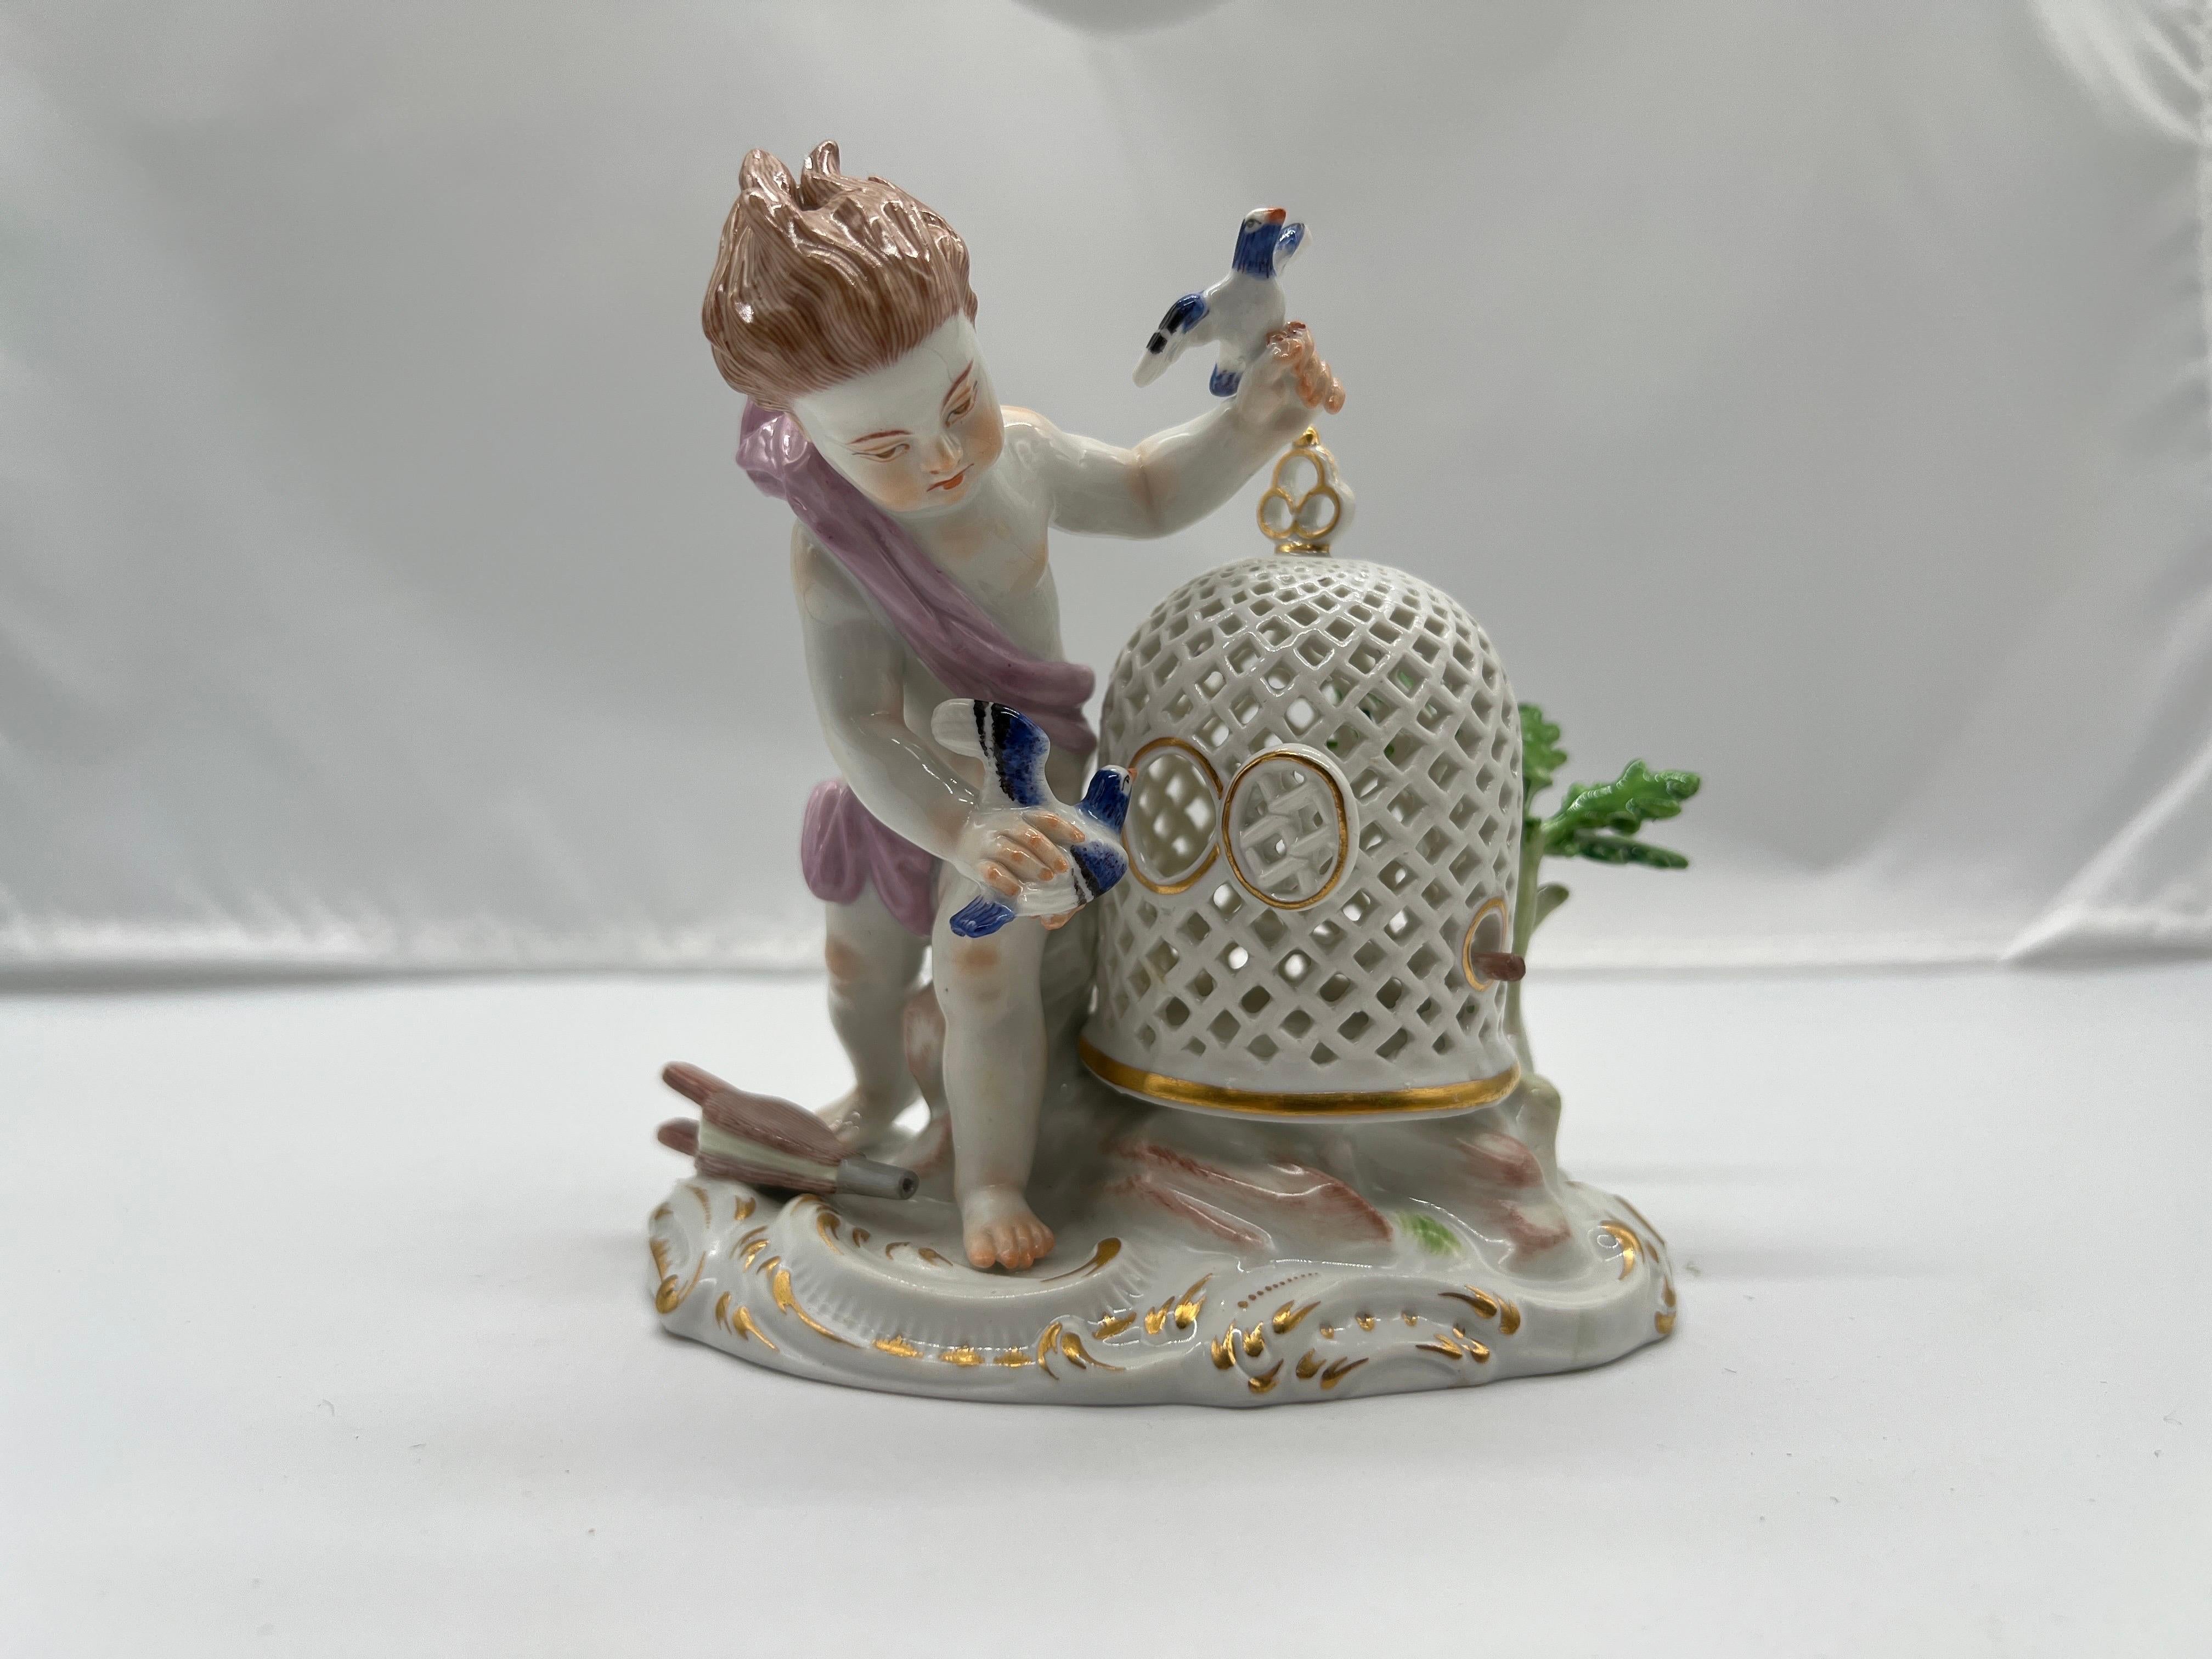 Meissen, 19th century.

A fine quality Meissen porcelain figurine depicting a young boy playing with his pet bird. The figure stands next to a pierced porcelain bird cage adorned with foliage. Marked to underside with appropriate underglaze. 